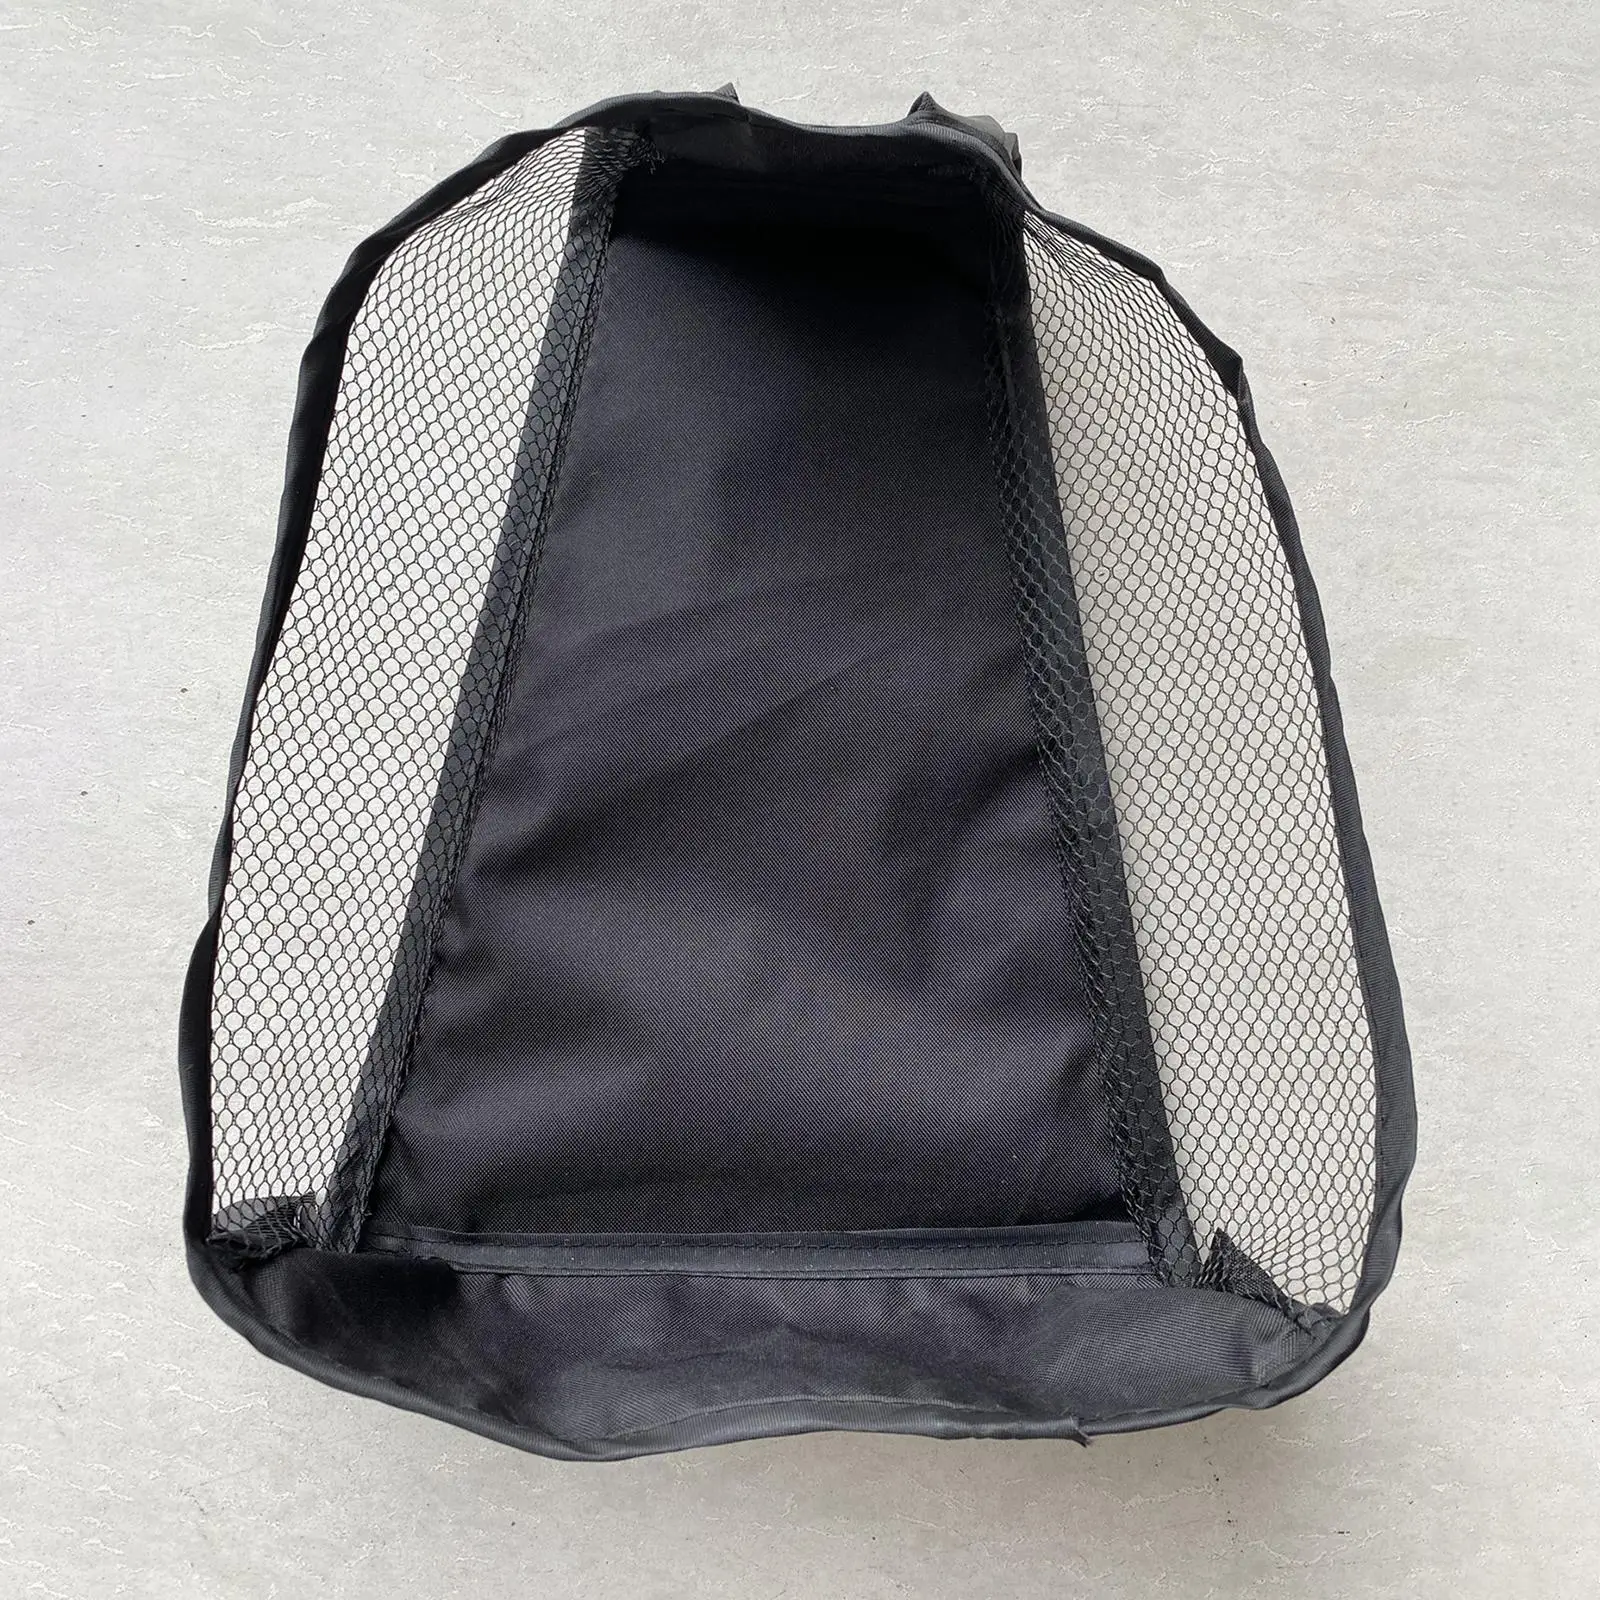 Baby Stroller Bag with Board Pram Bottom Basket Underseat Tray for Feeding Bottles Clothes Carrying Diaper Sundries Bottle